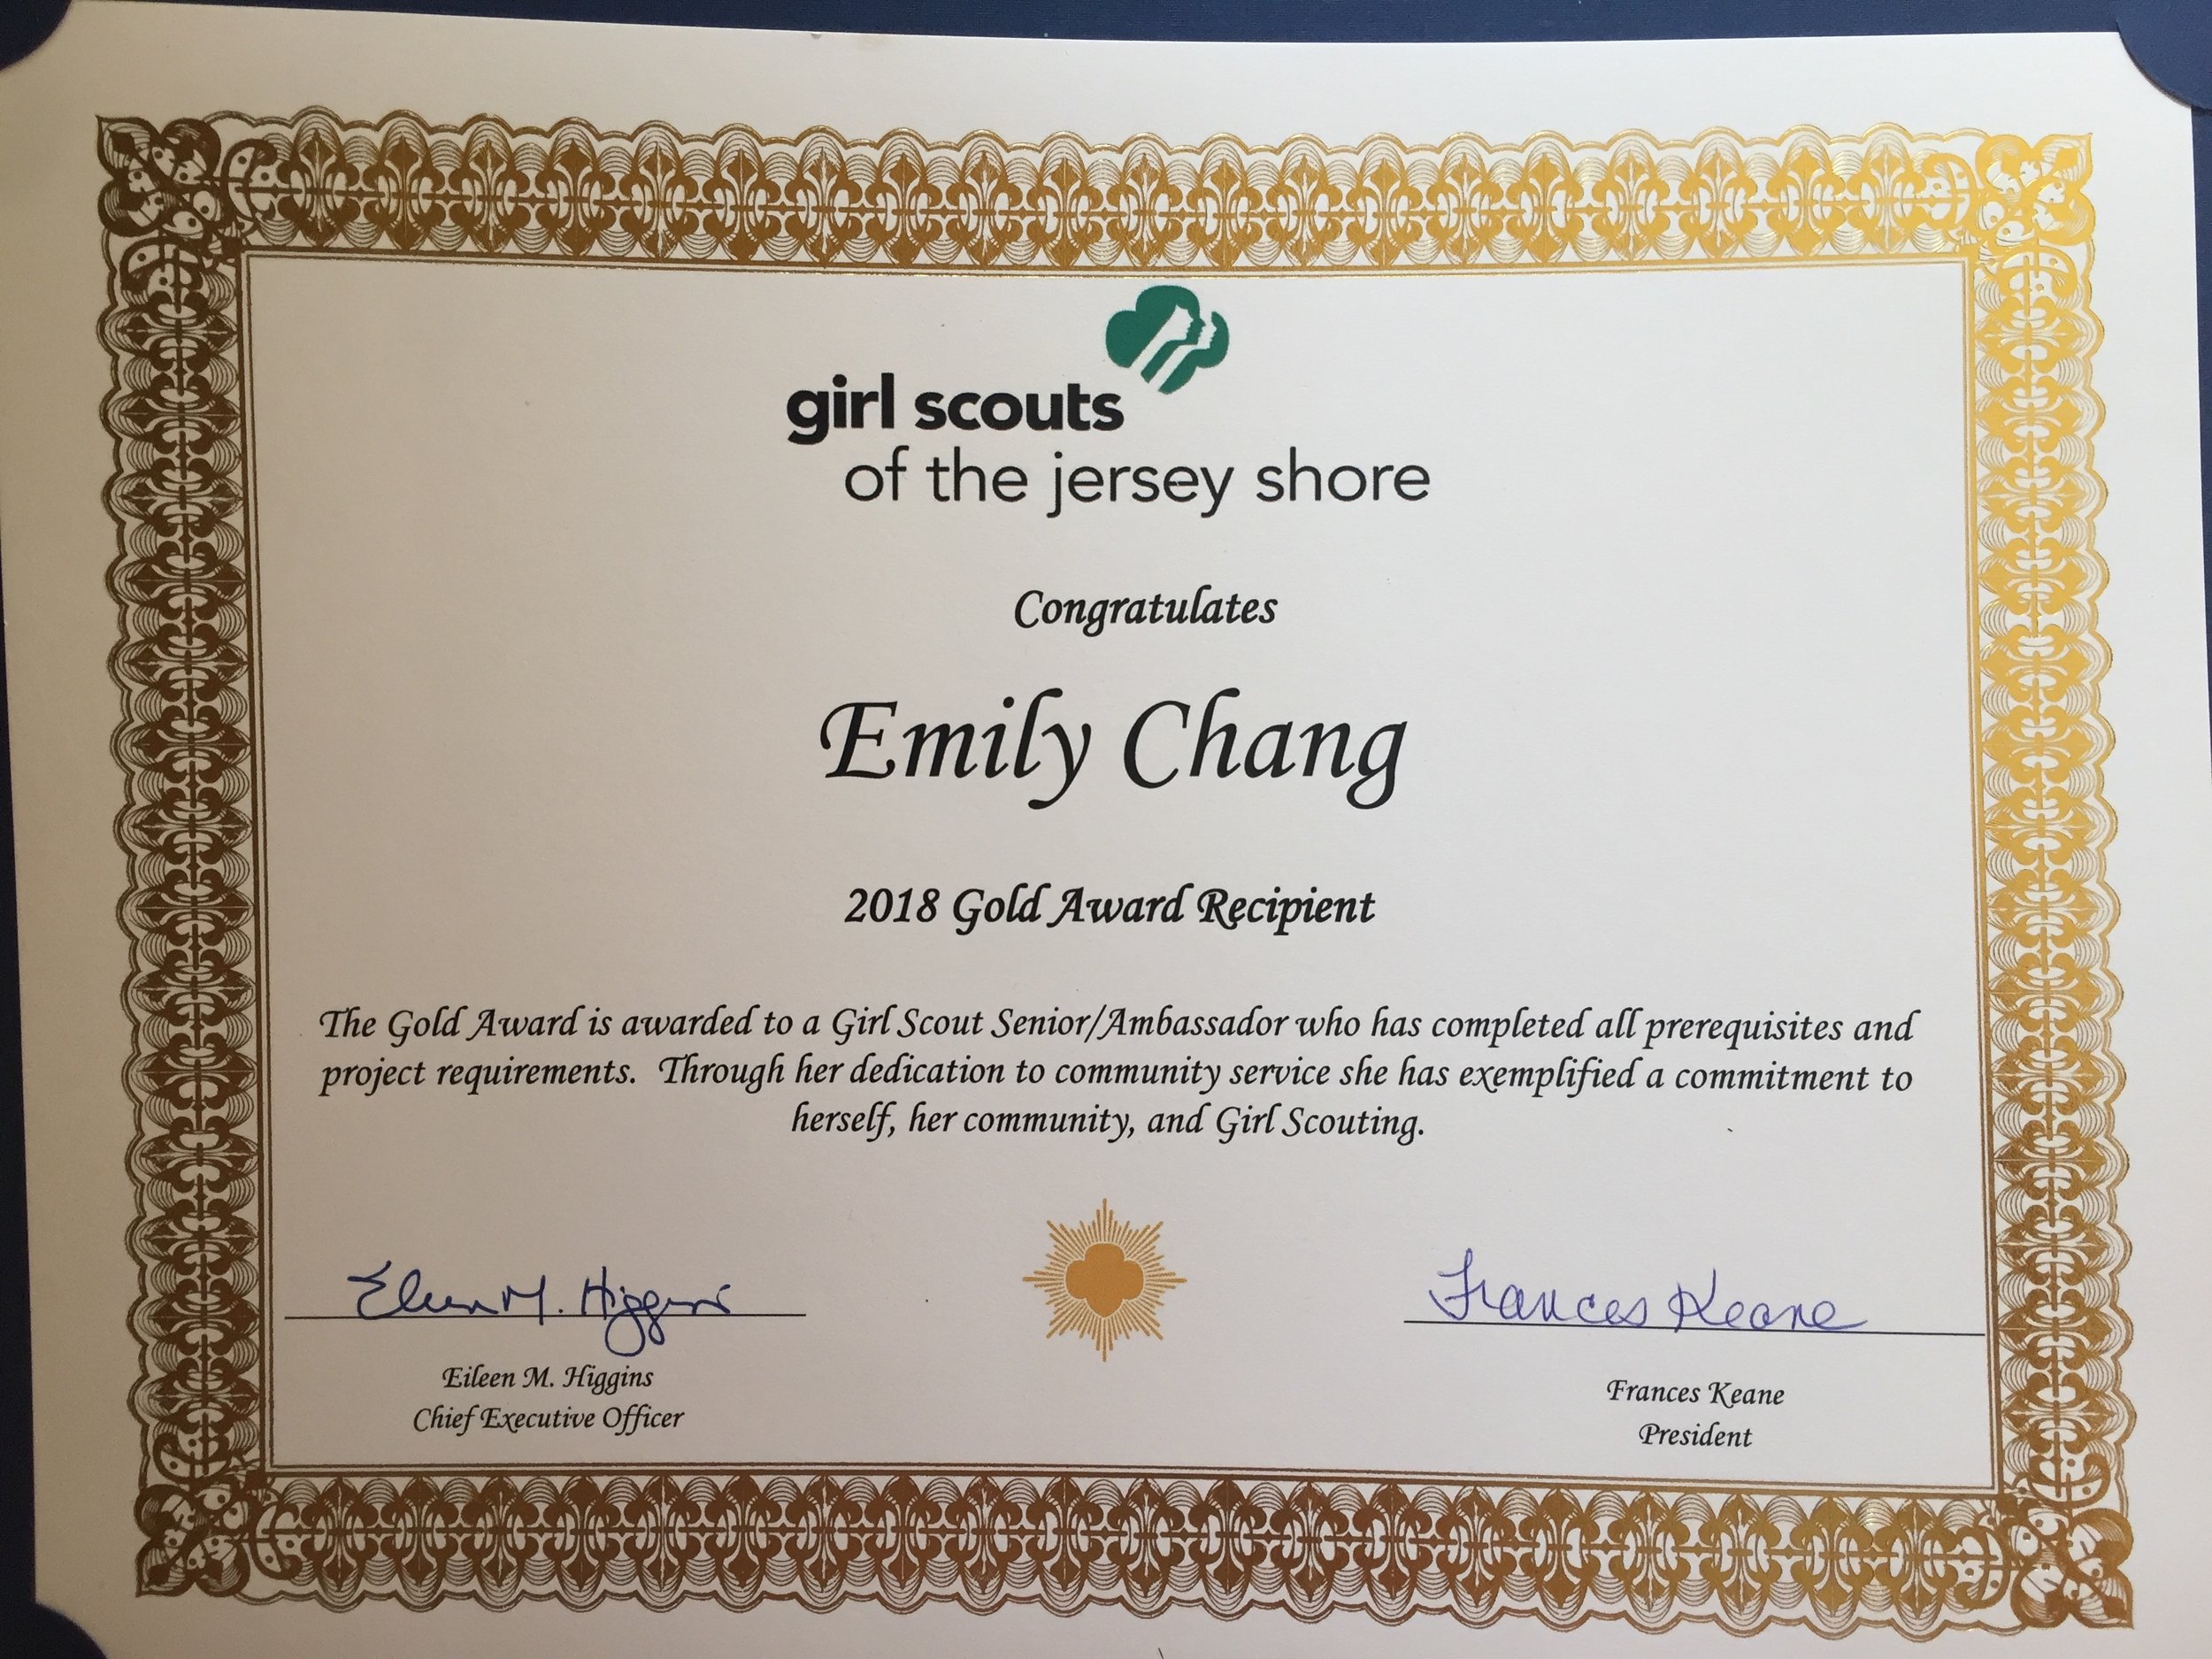 6/12/18 Emily Chang Day proclaimed